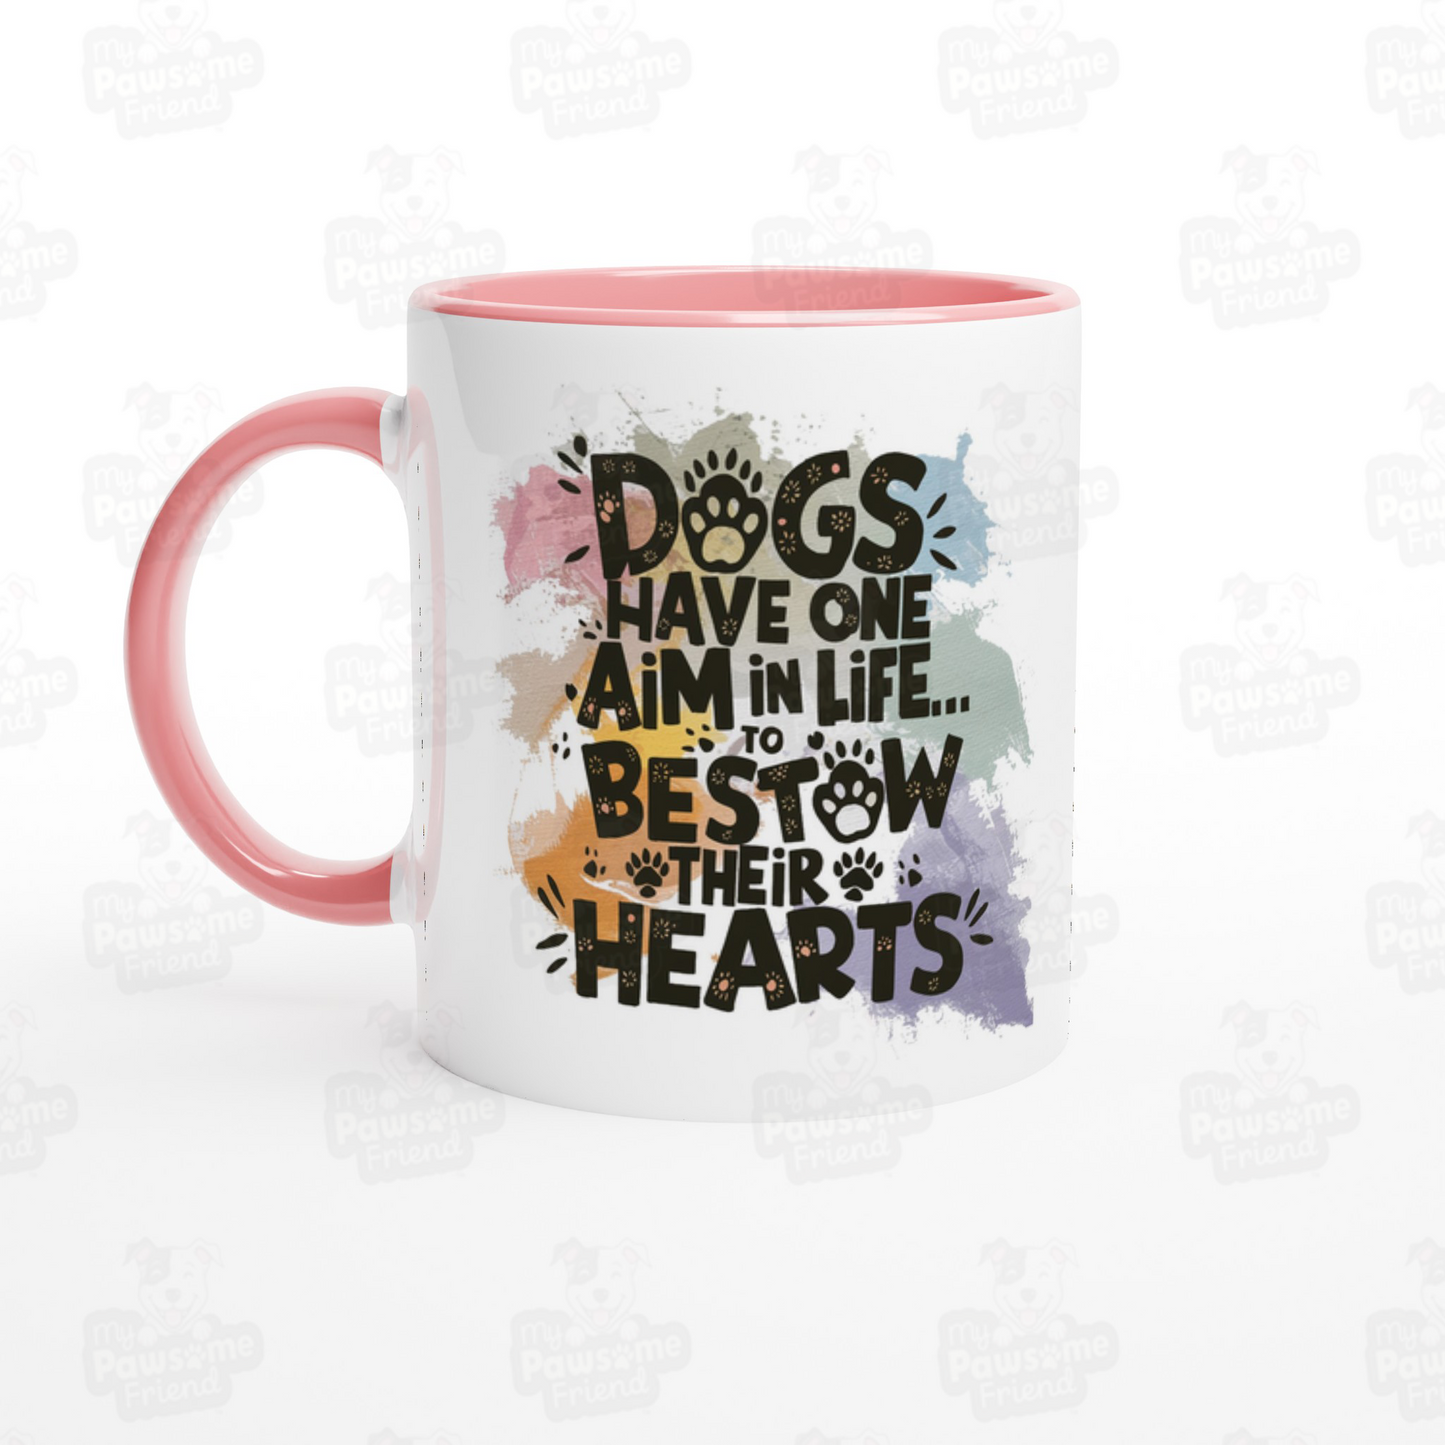 A ceramic coffee mug with a beautiful splash color design with the phrase: "Dogs Have One Aim in Life... To Bestow Their Hearts". The handle and inside of the coffee mug is pink